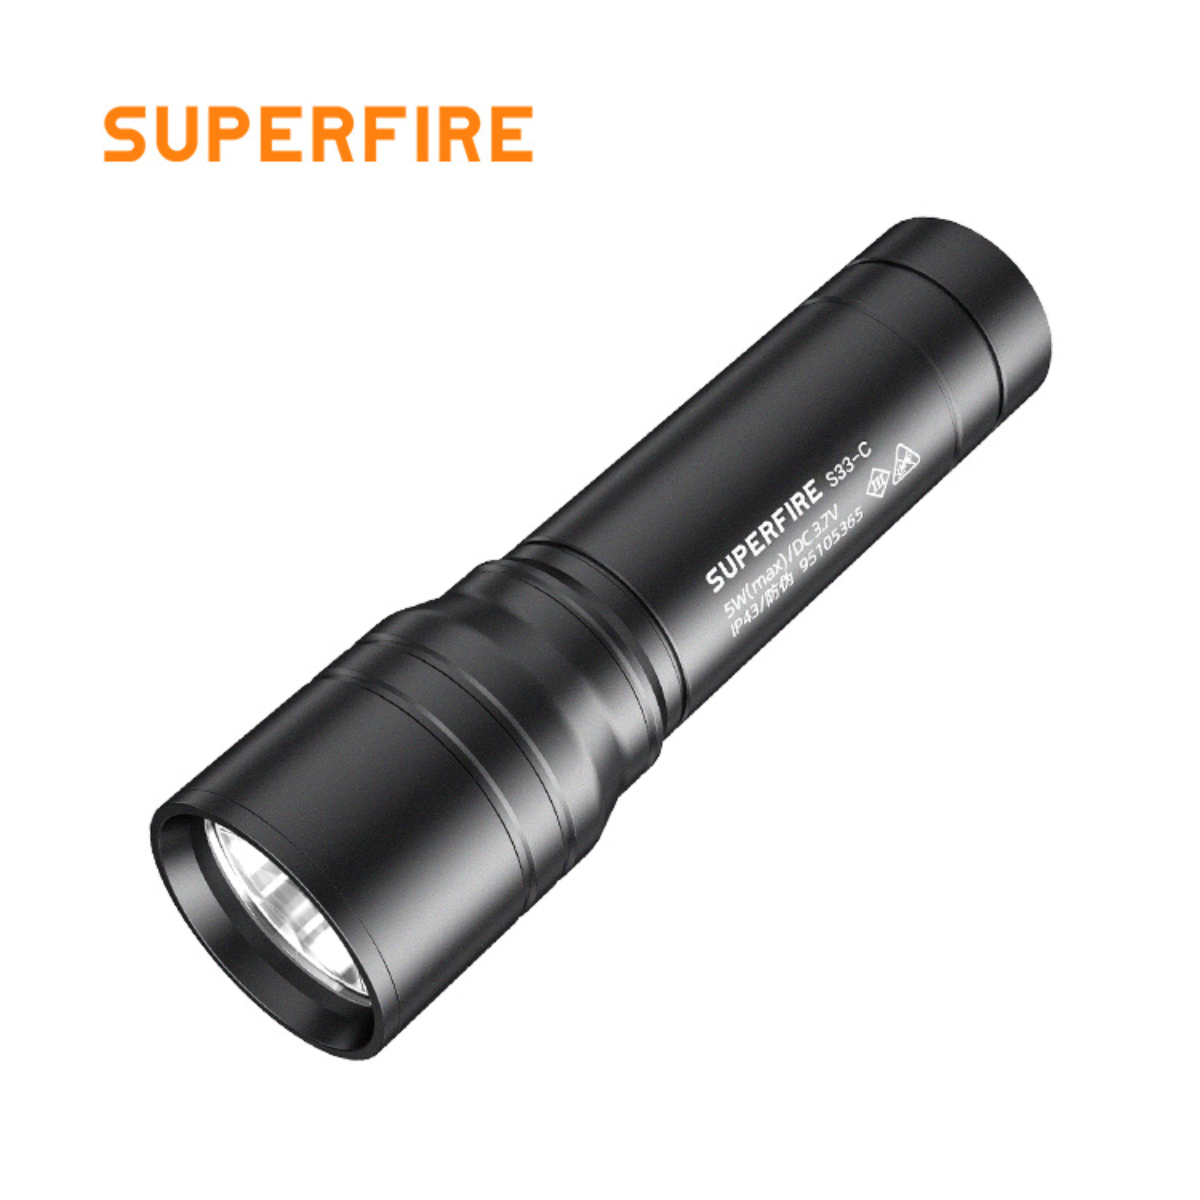 Superfire is a company that specializes in small LED flashlight